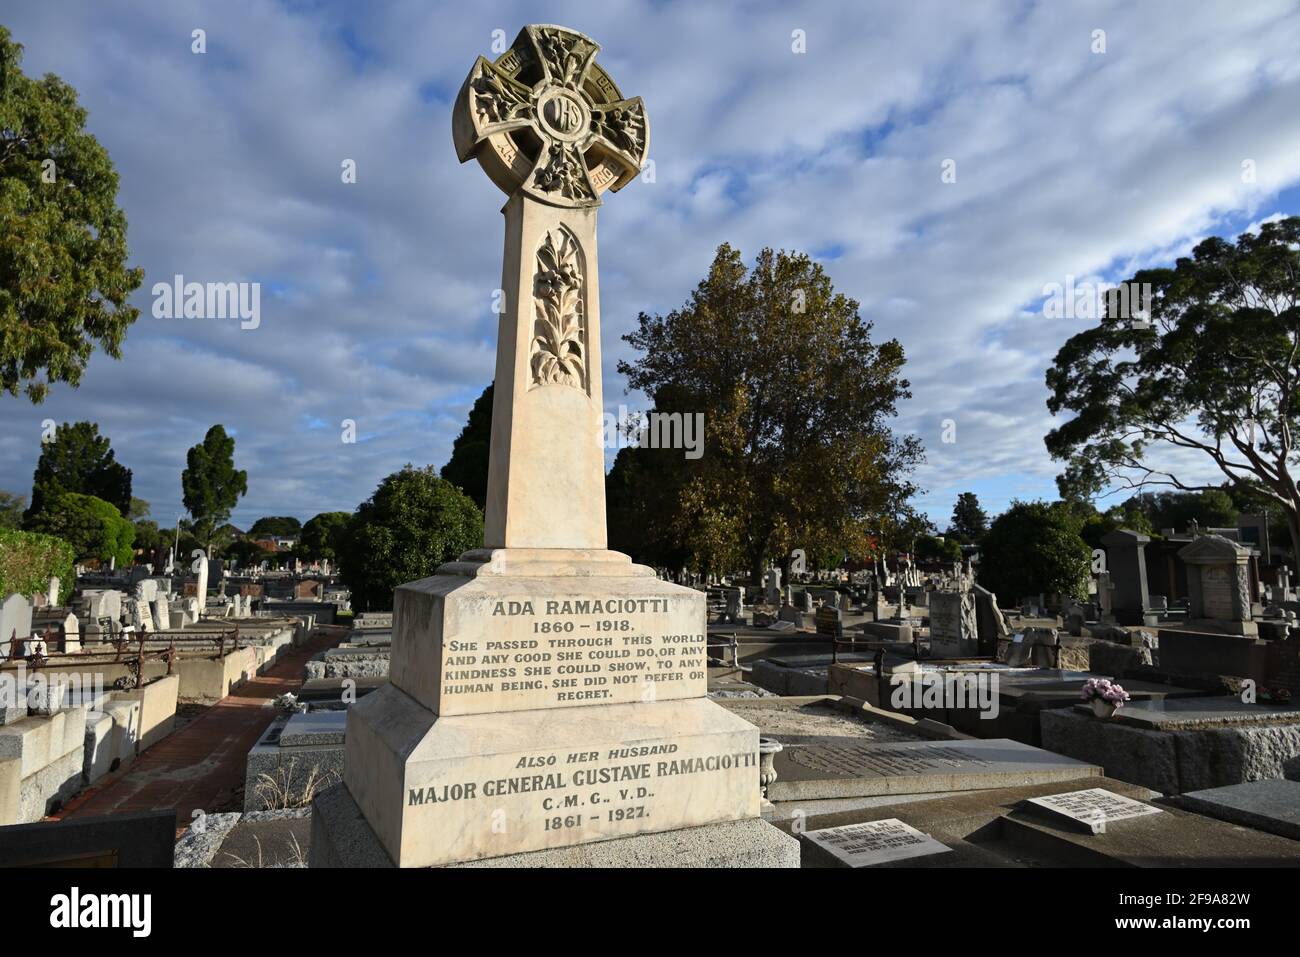 The grave of Ada Ramaciotti (1860-1918) and her husband Major General Gustave Ramaciotti (1861-1927) at Brighton General Cemetery. Stock Photo